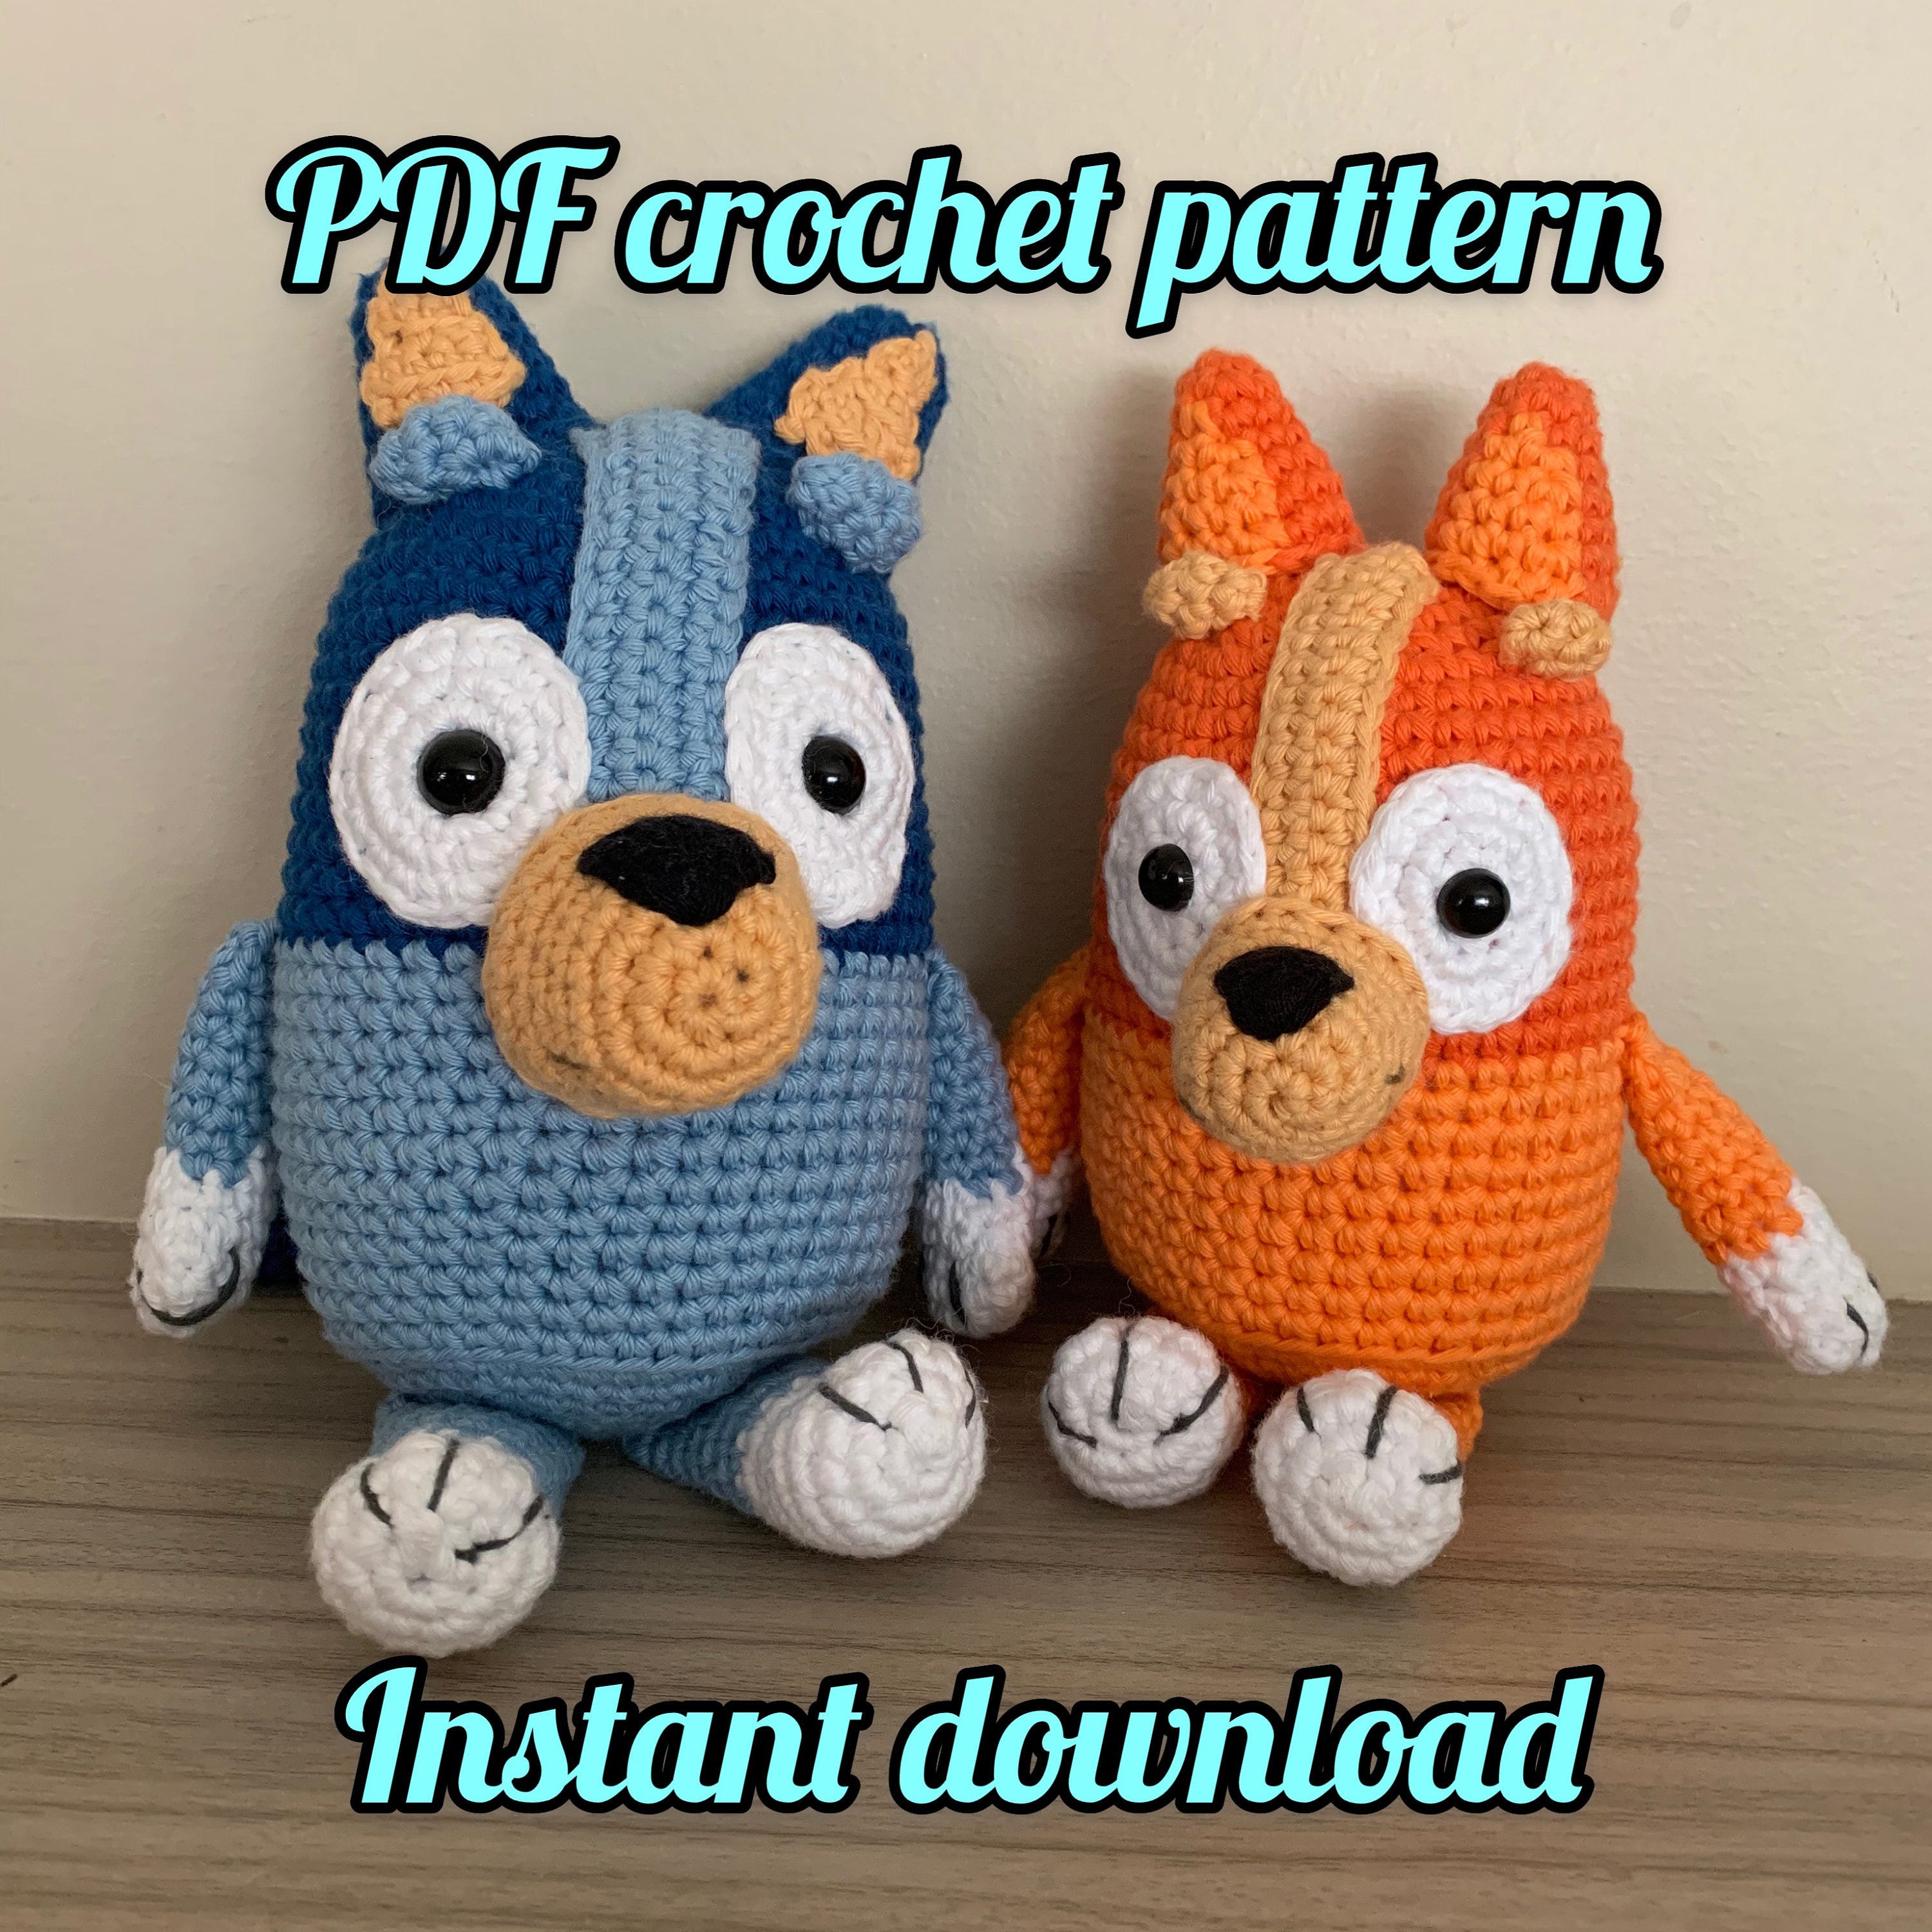 TWO PATTERNS: Blue and red heelers crochet patterns - bluey crochet pattern - bingo crochet pattern